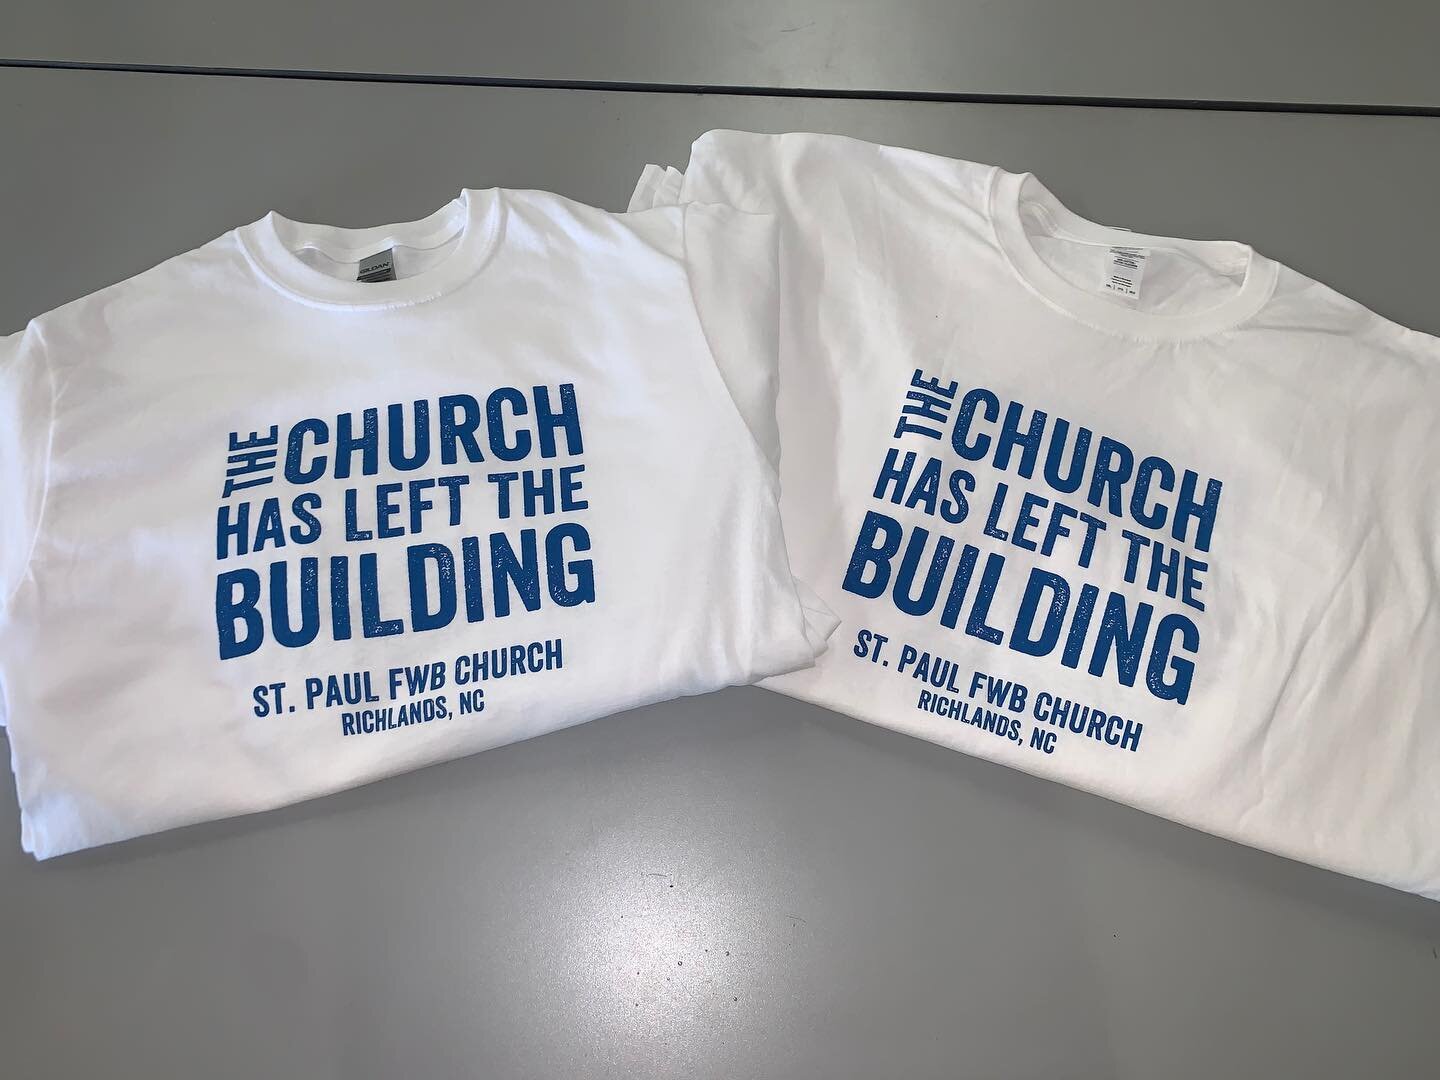 Thank you St. Paul FWB Church for the order! The church has, indeed, left the building! 🤣

#magicmilescreenprintingco #downtownkinston